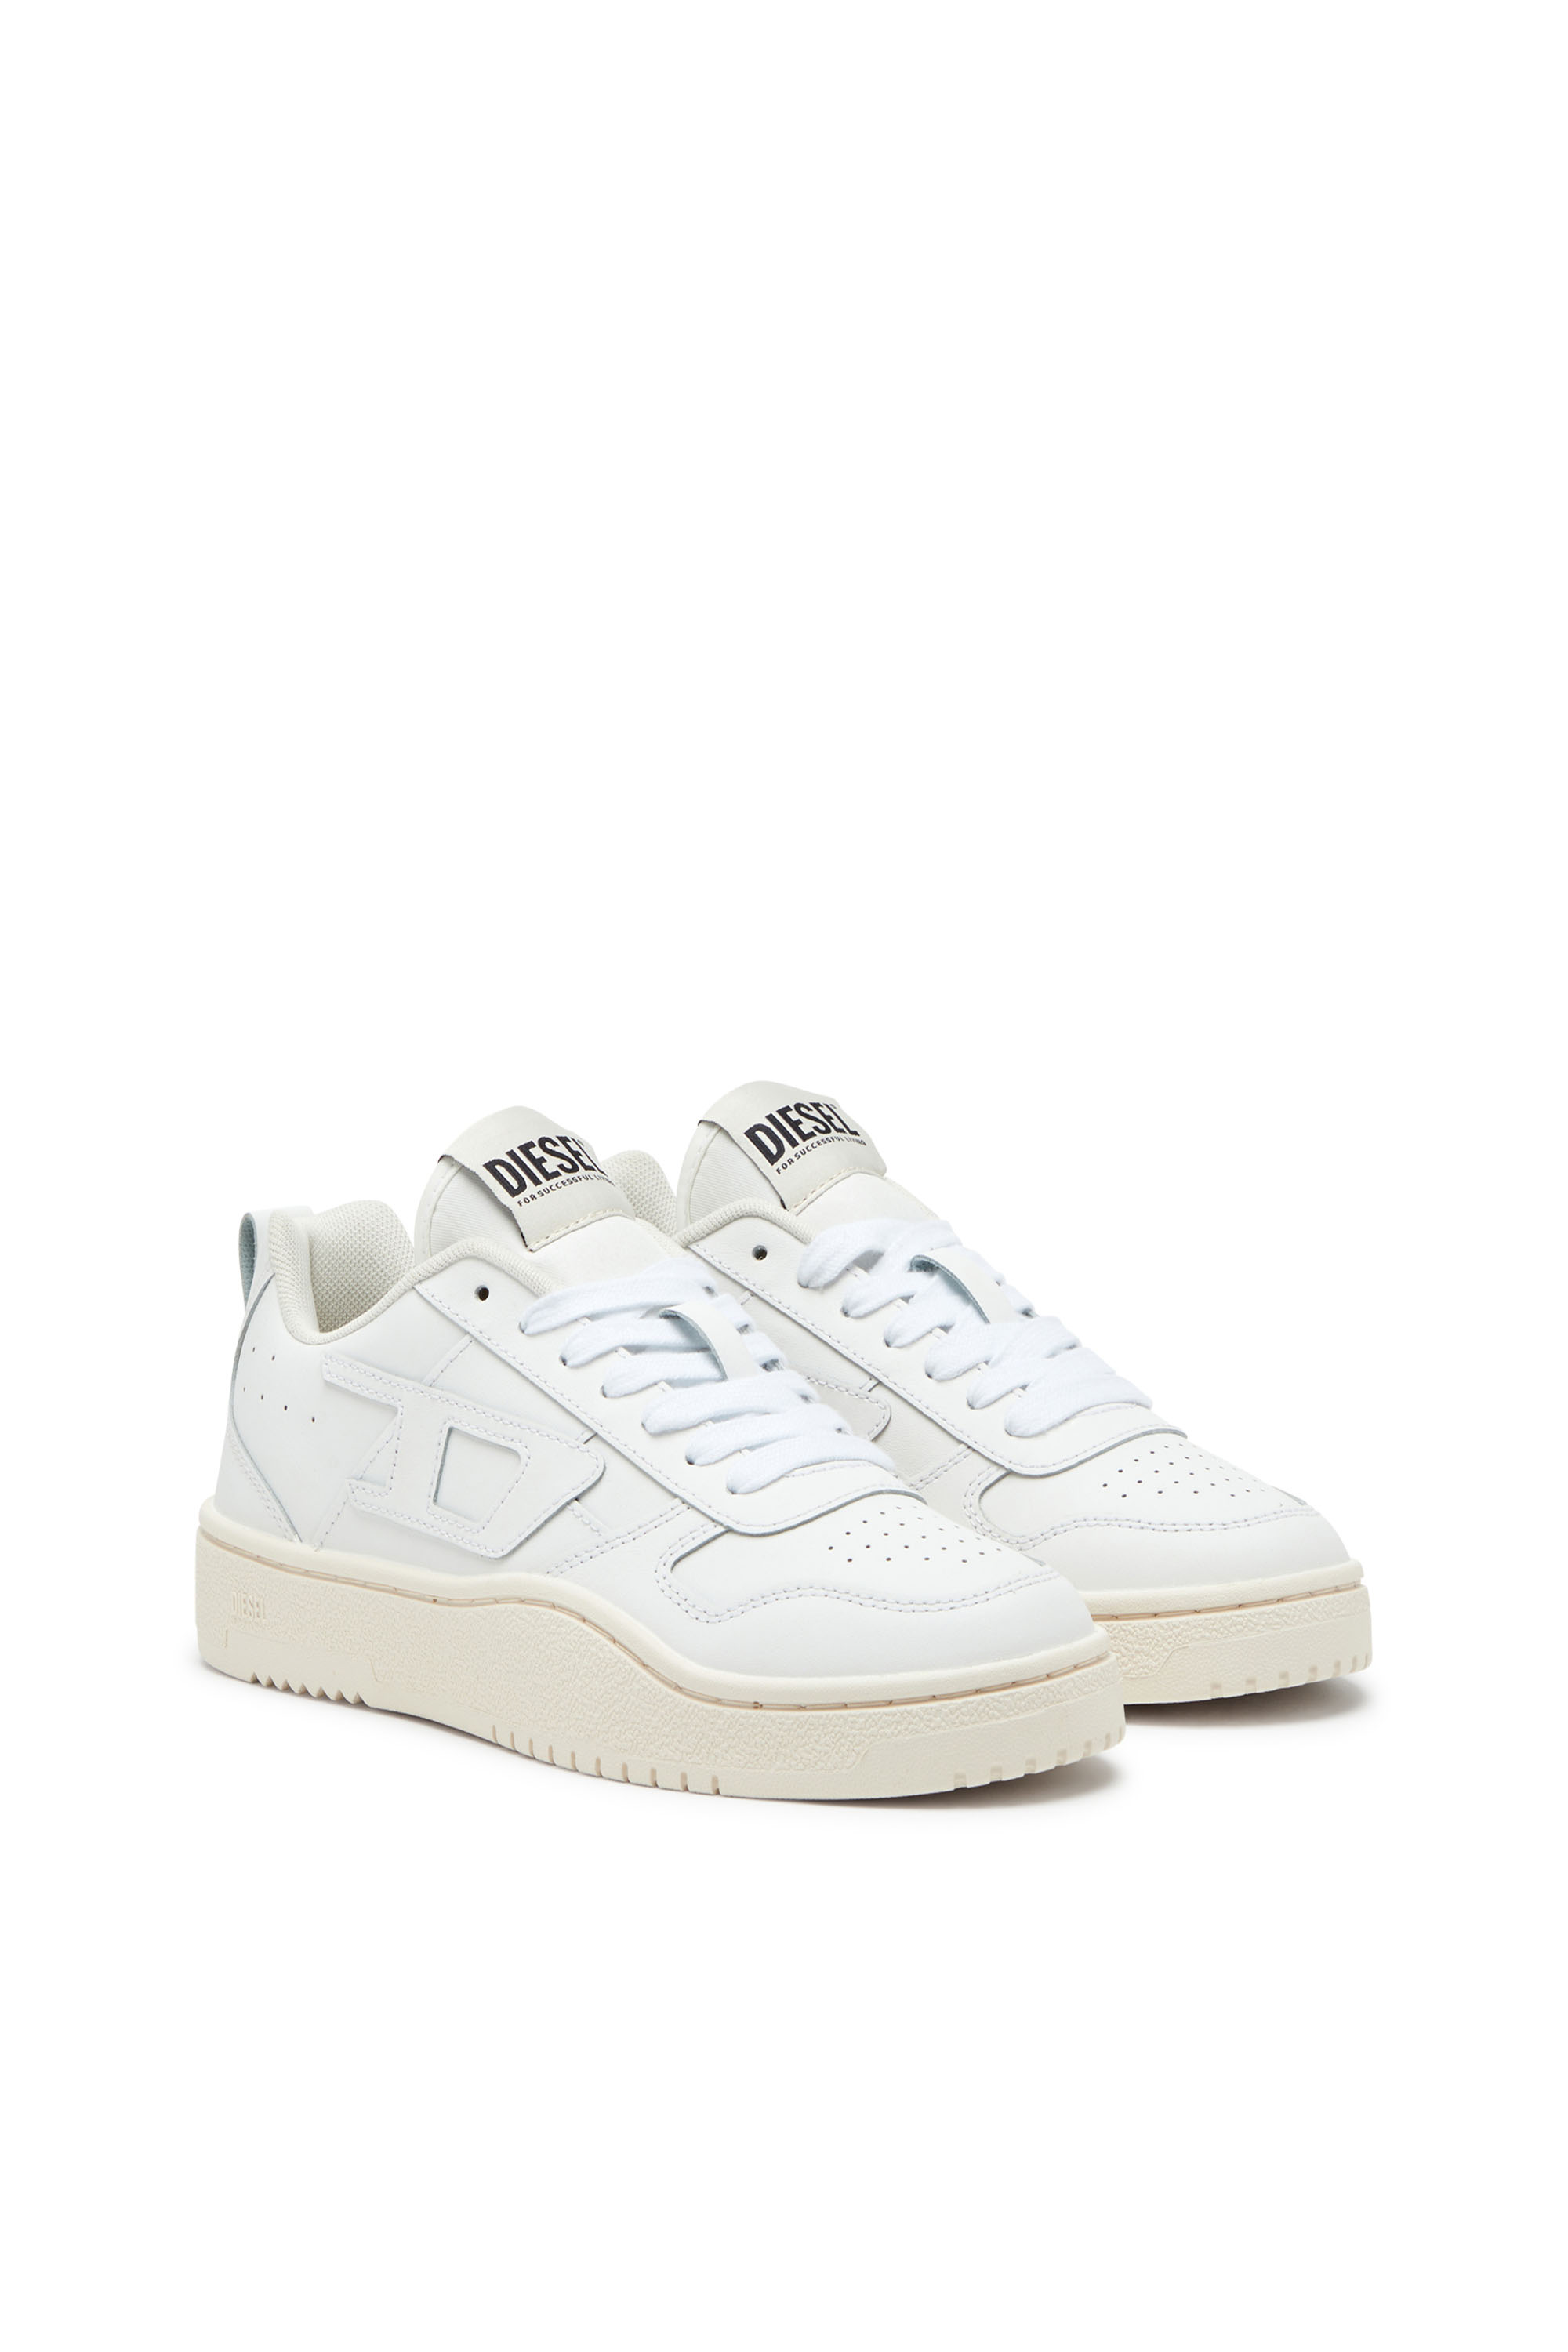 Diesel - S-UKIYO V2 LOW W, Woman S-Ukiyo Low-Low-top sneakers in leather and nylon in White - Image 2